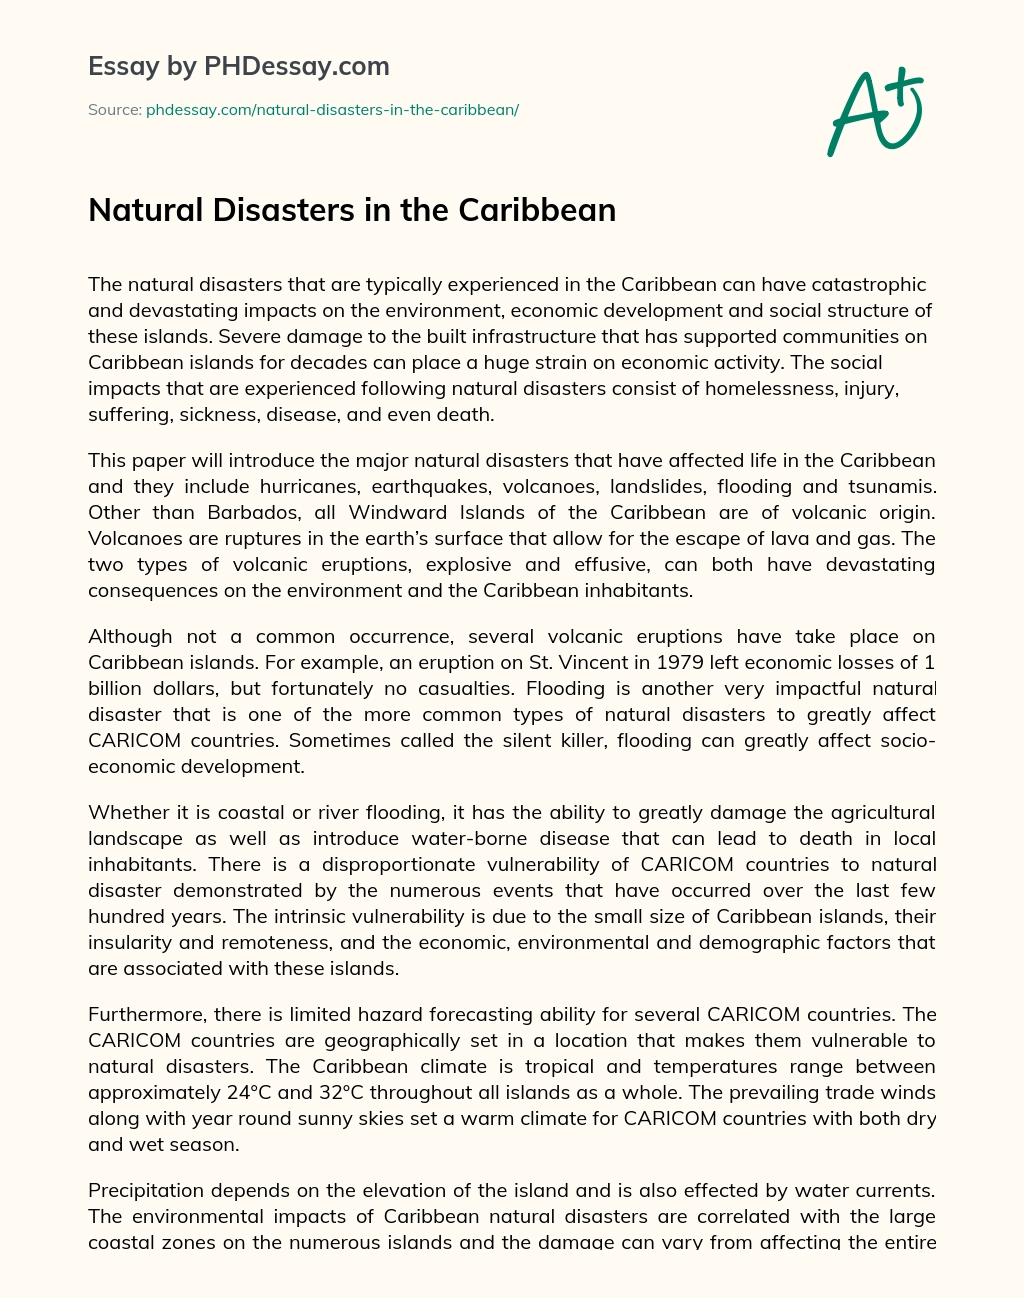 Natural Disasters in the Caribbean essay